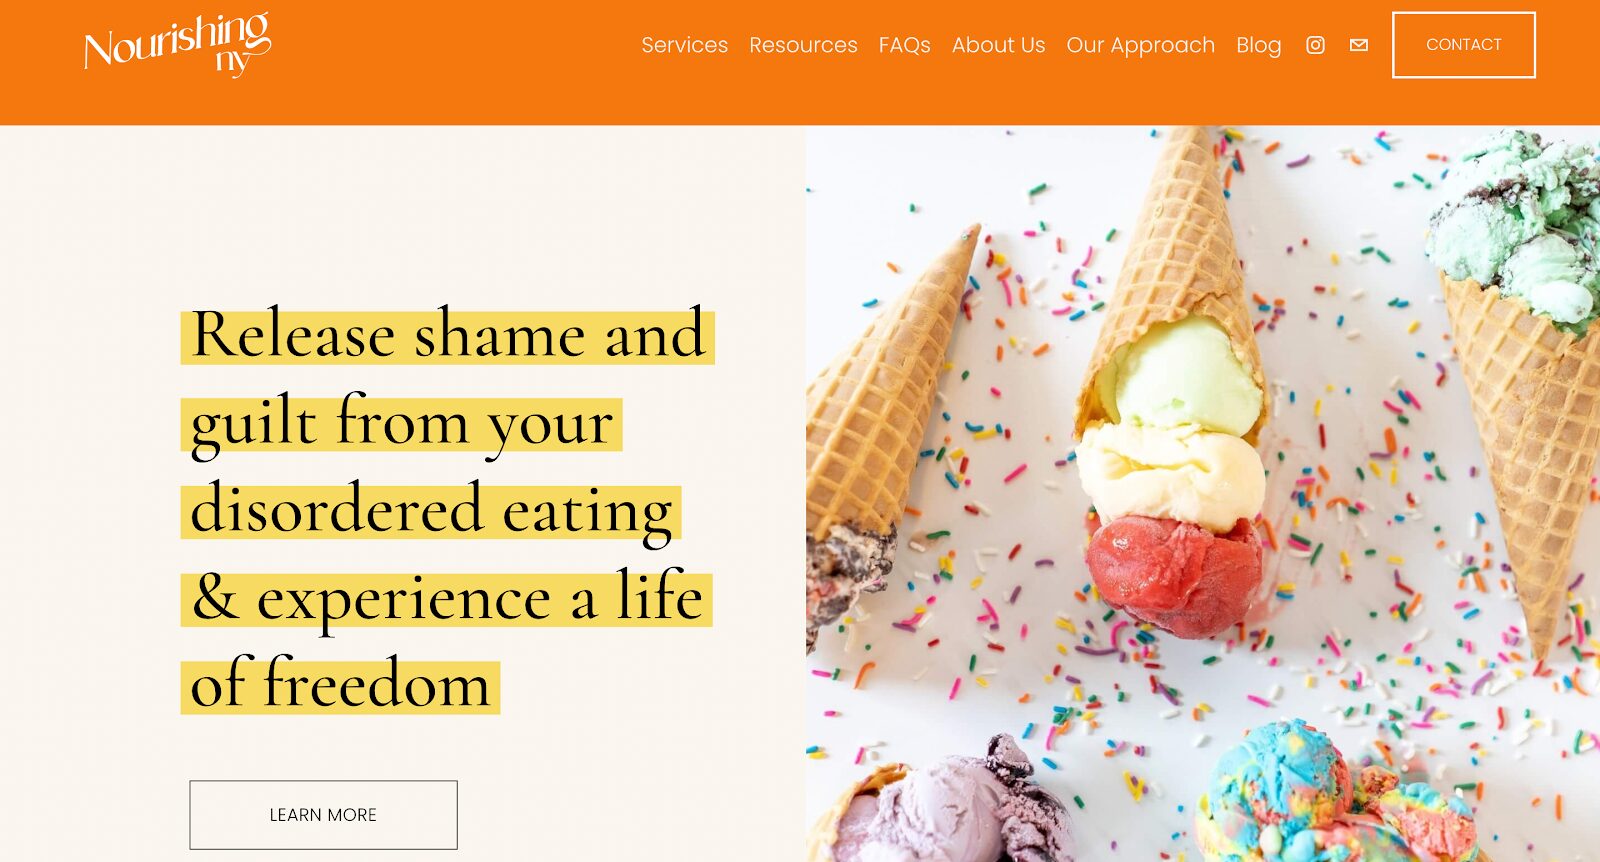 Example of a headline to help therapists write their website copy. "Release shame and guilt from your disordered eating & experience a life of freedom."